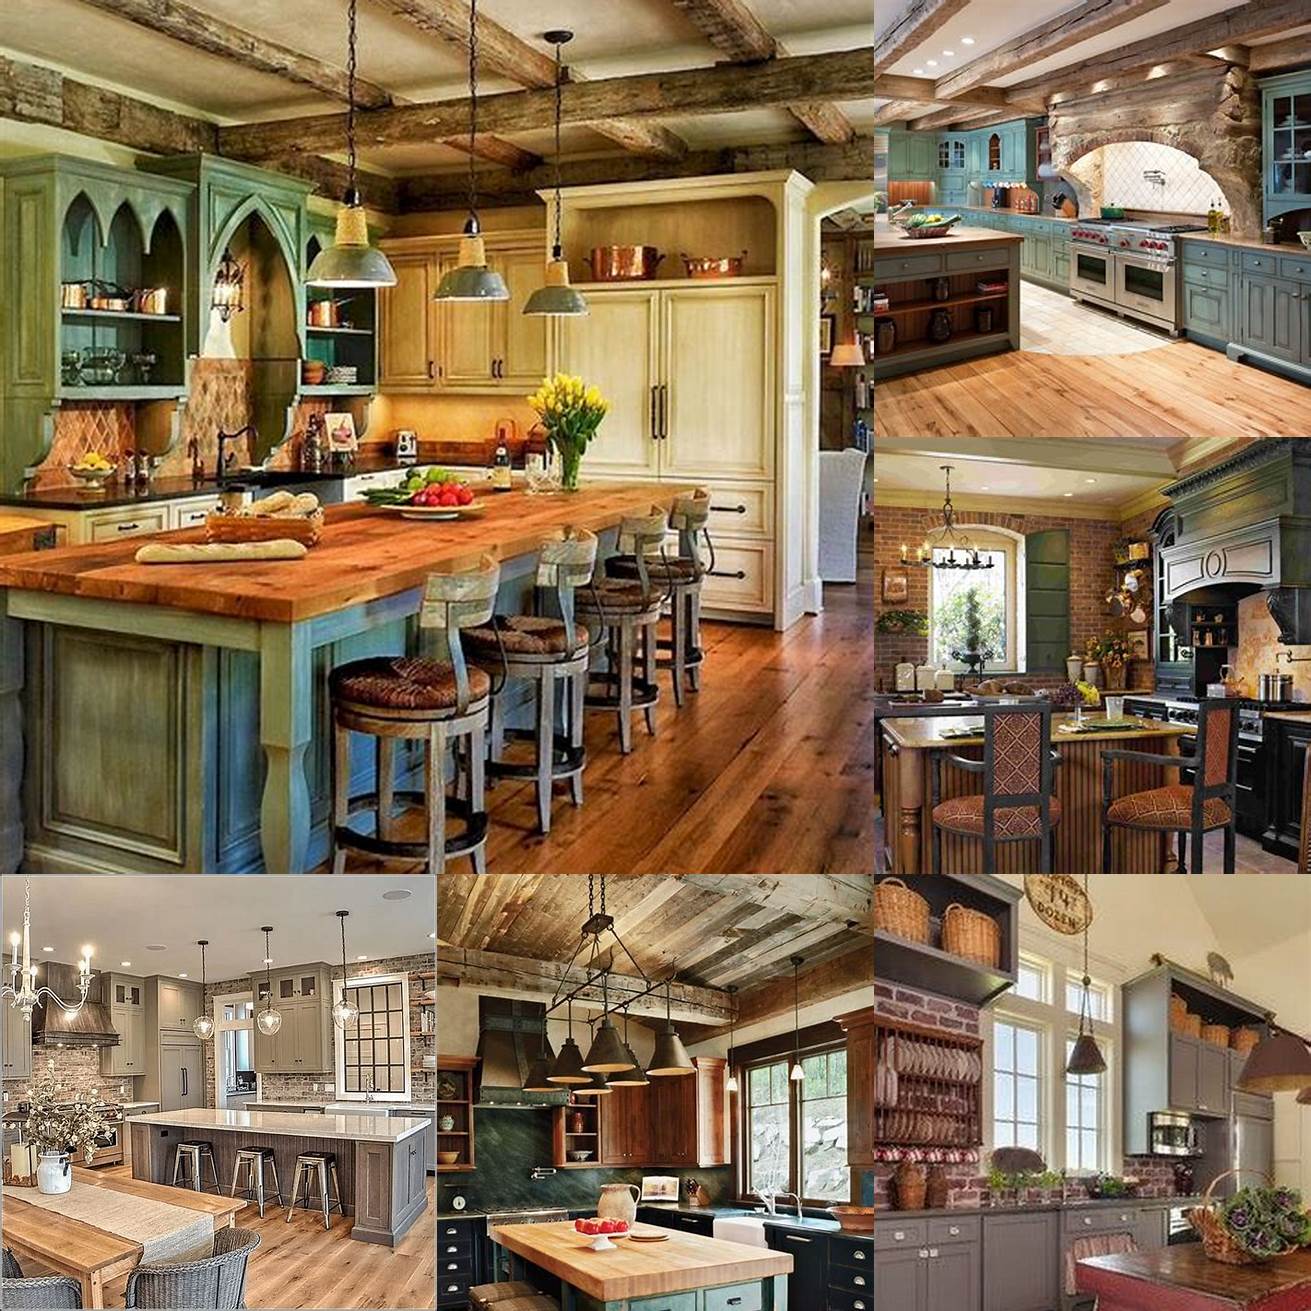 Traditional country-style kitchen with warm wood cabinetry stone backsplash and vintage-style lighting The large center island provides ample workspace and storage